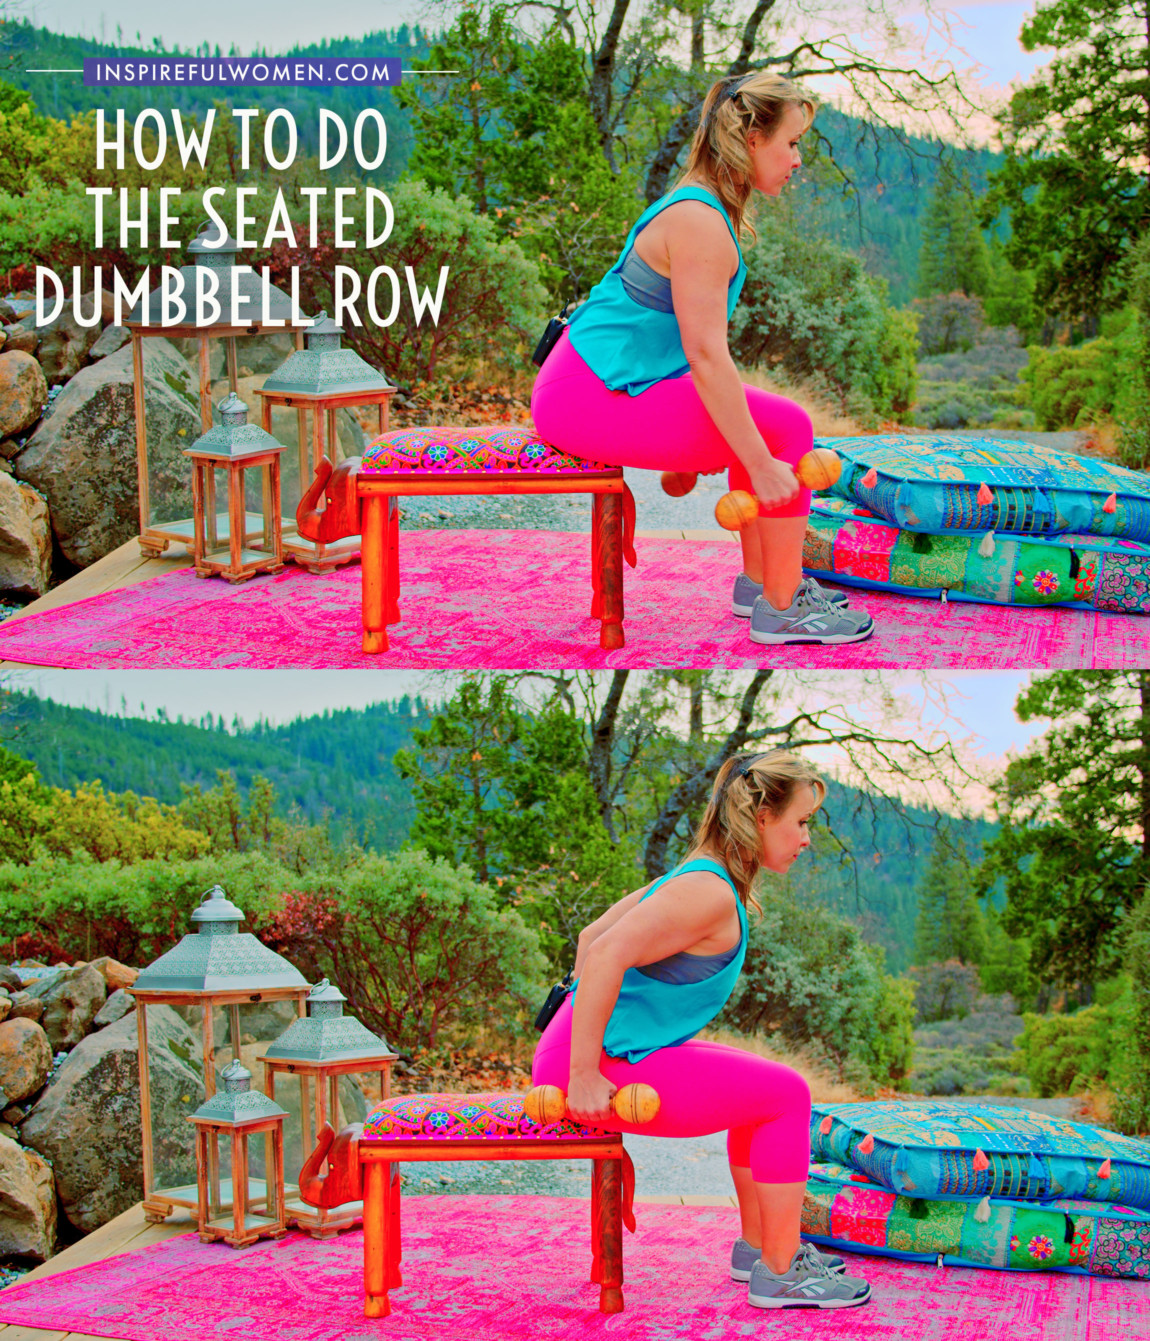 how-to-do-the-seated-dumbbell-row-on-bench-step-by-step-tutorial-home-workout